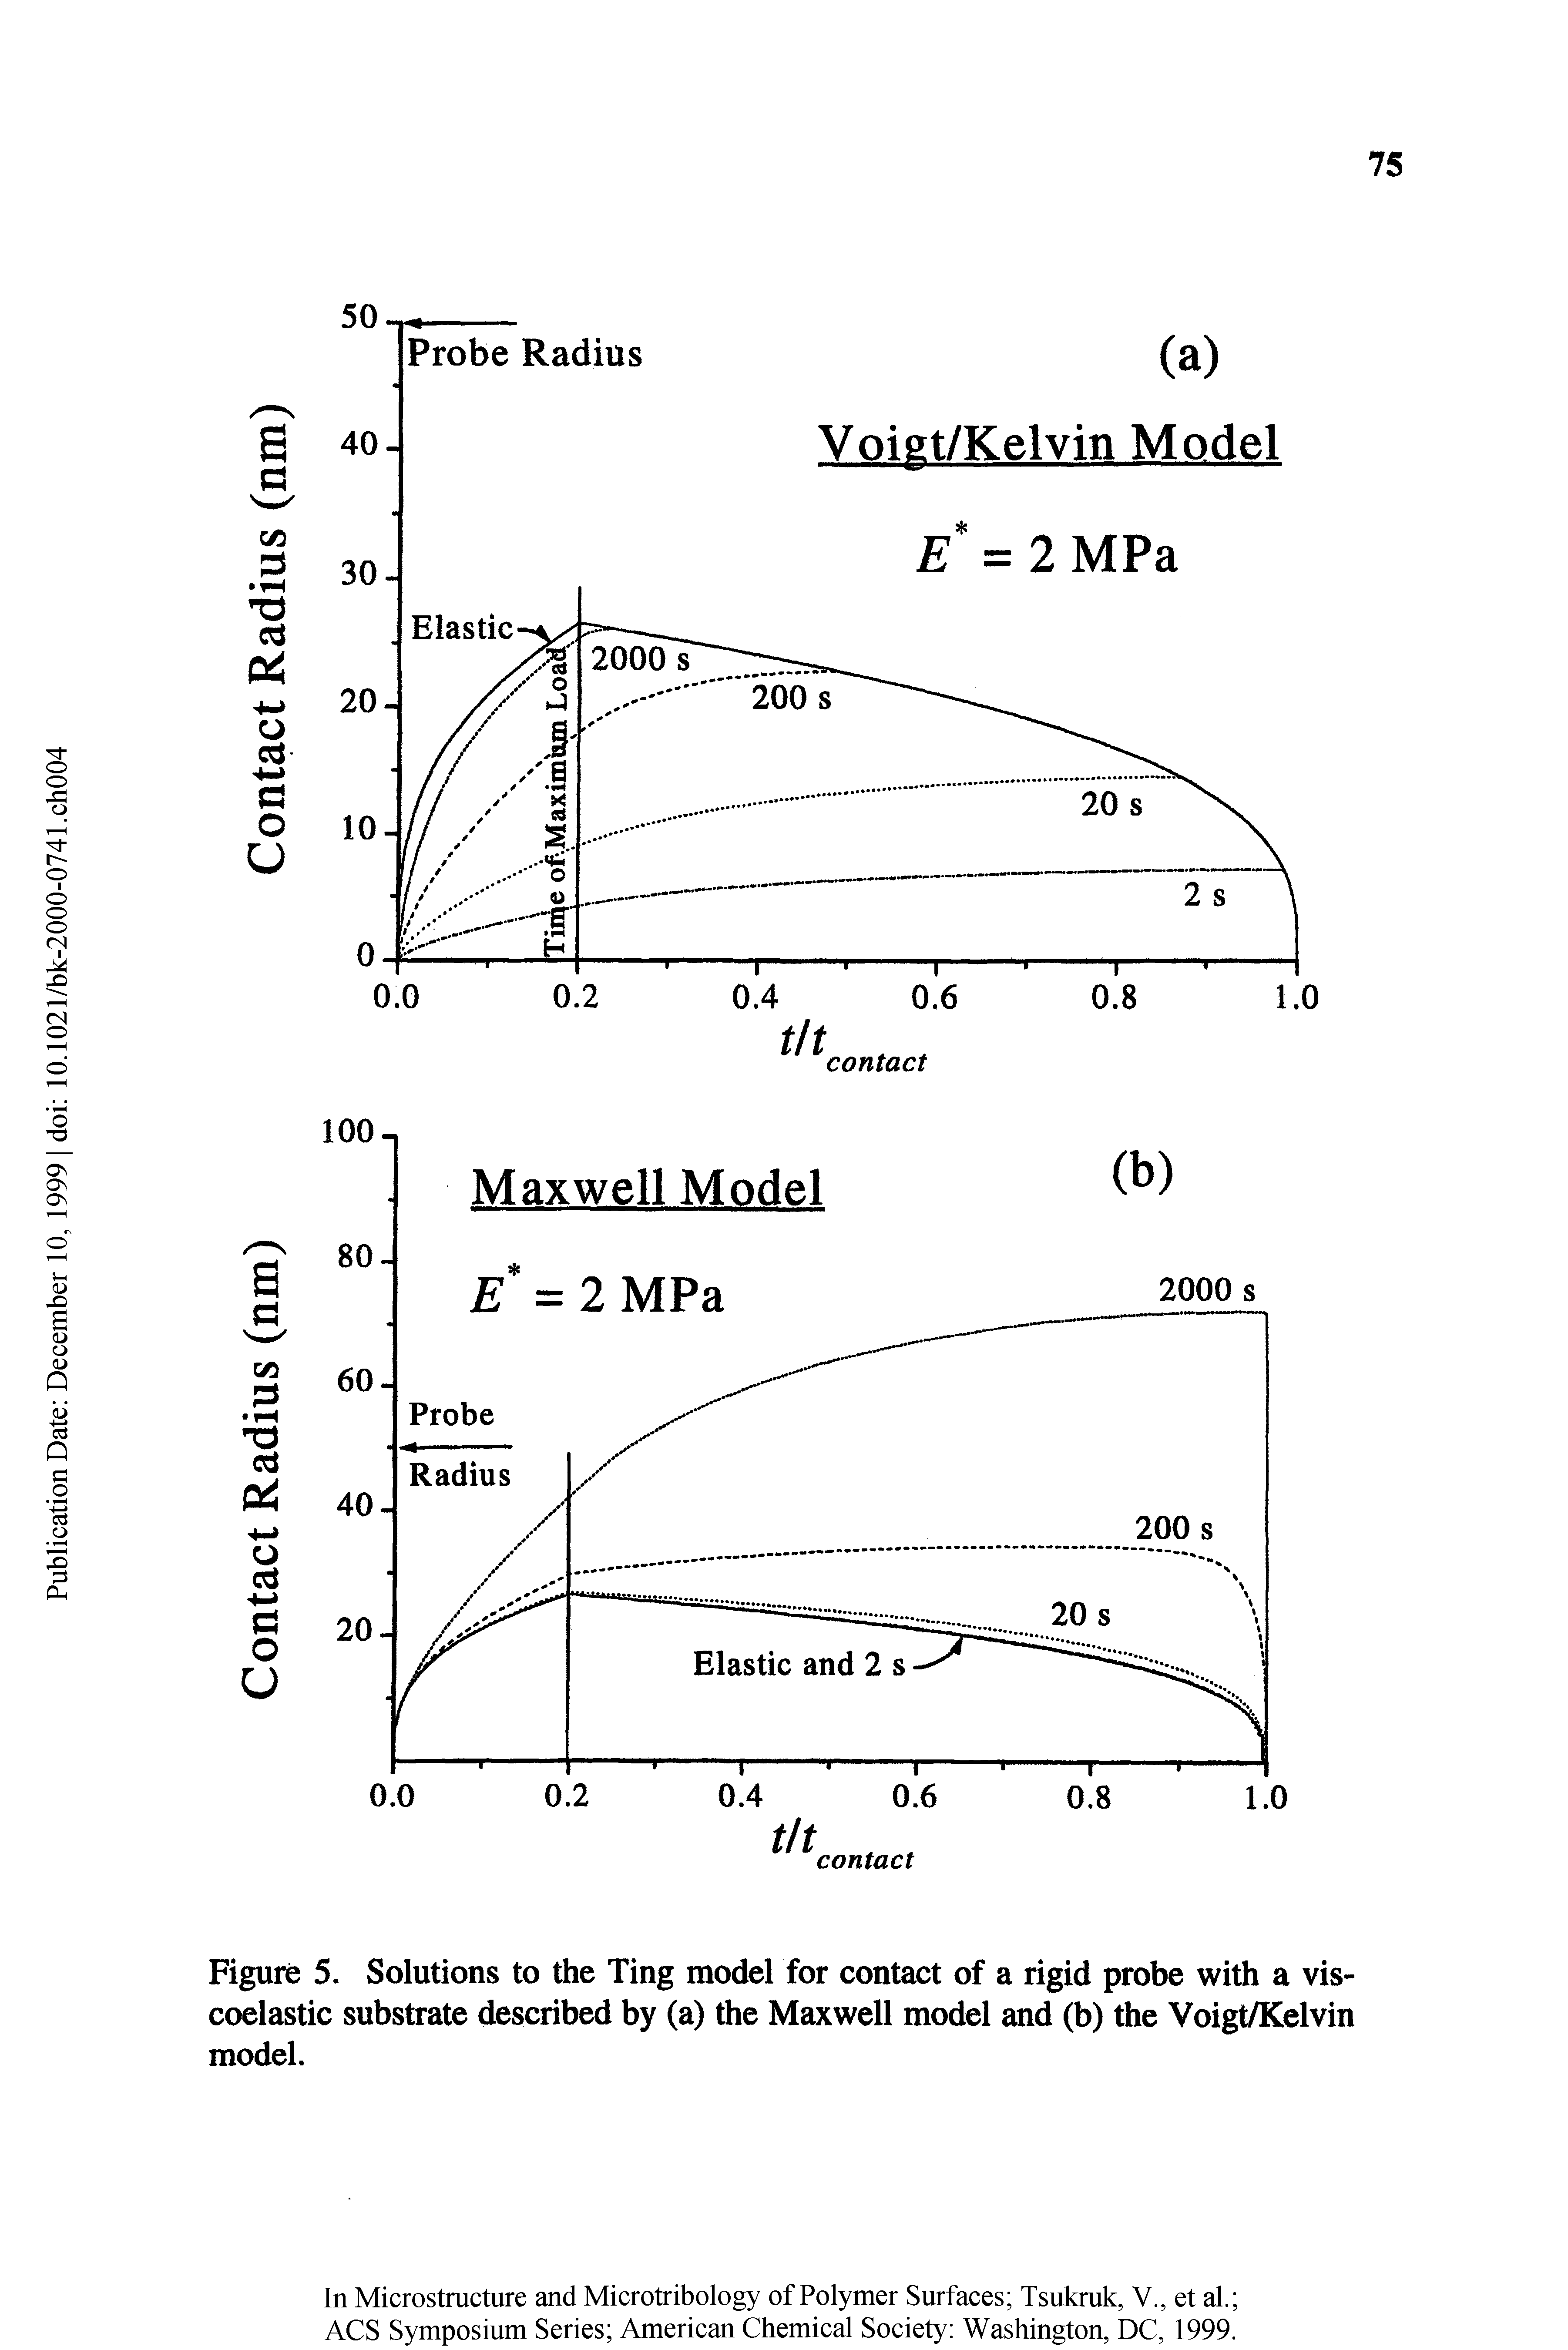 Figure 5. Solutions to the Ting model for contact of a rigid probe with a viscoelastic substrate described by (a) the Maxwell model and (b) the Voigt/Kelvin model.